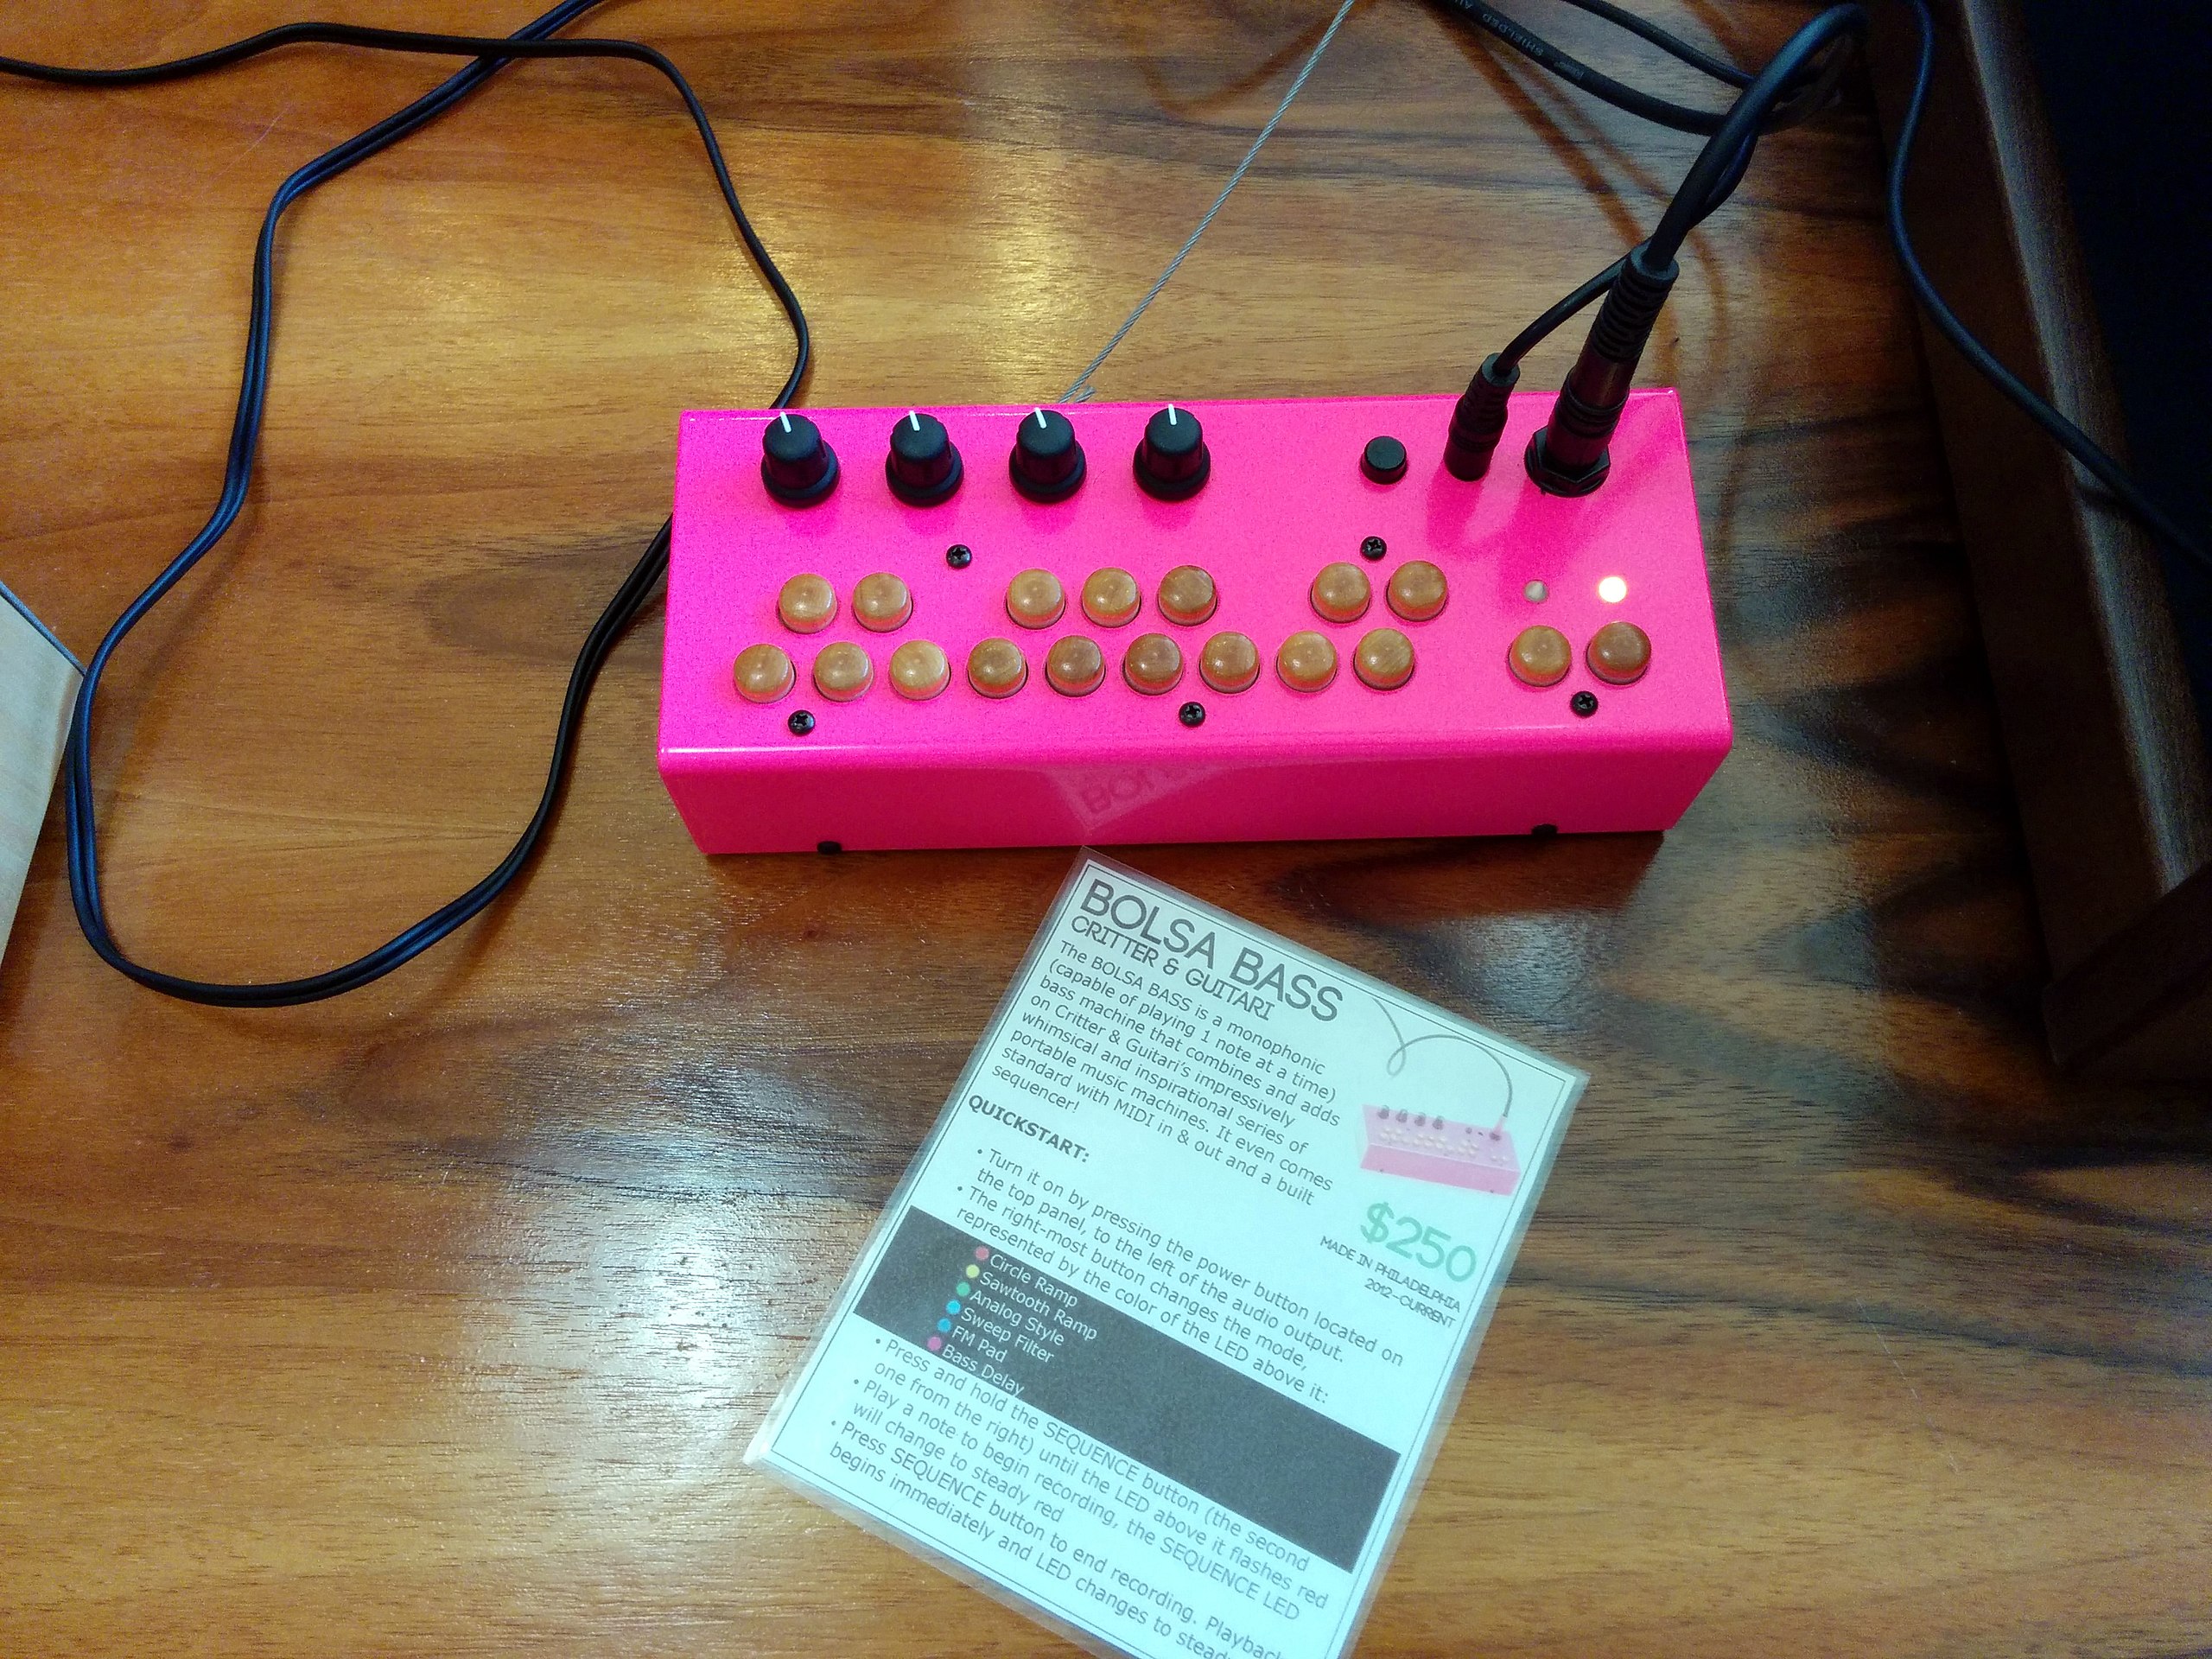 File:Critter & Guitari Bolsa Bass - bass synthesizer with six modes,  featuring a sequencer & MIDI (2014-07-12 by Cory Doctorow).jpg - Wikimedia  Commons